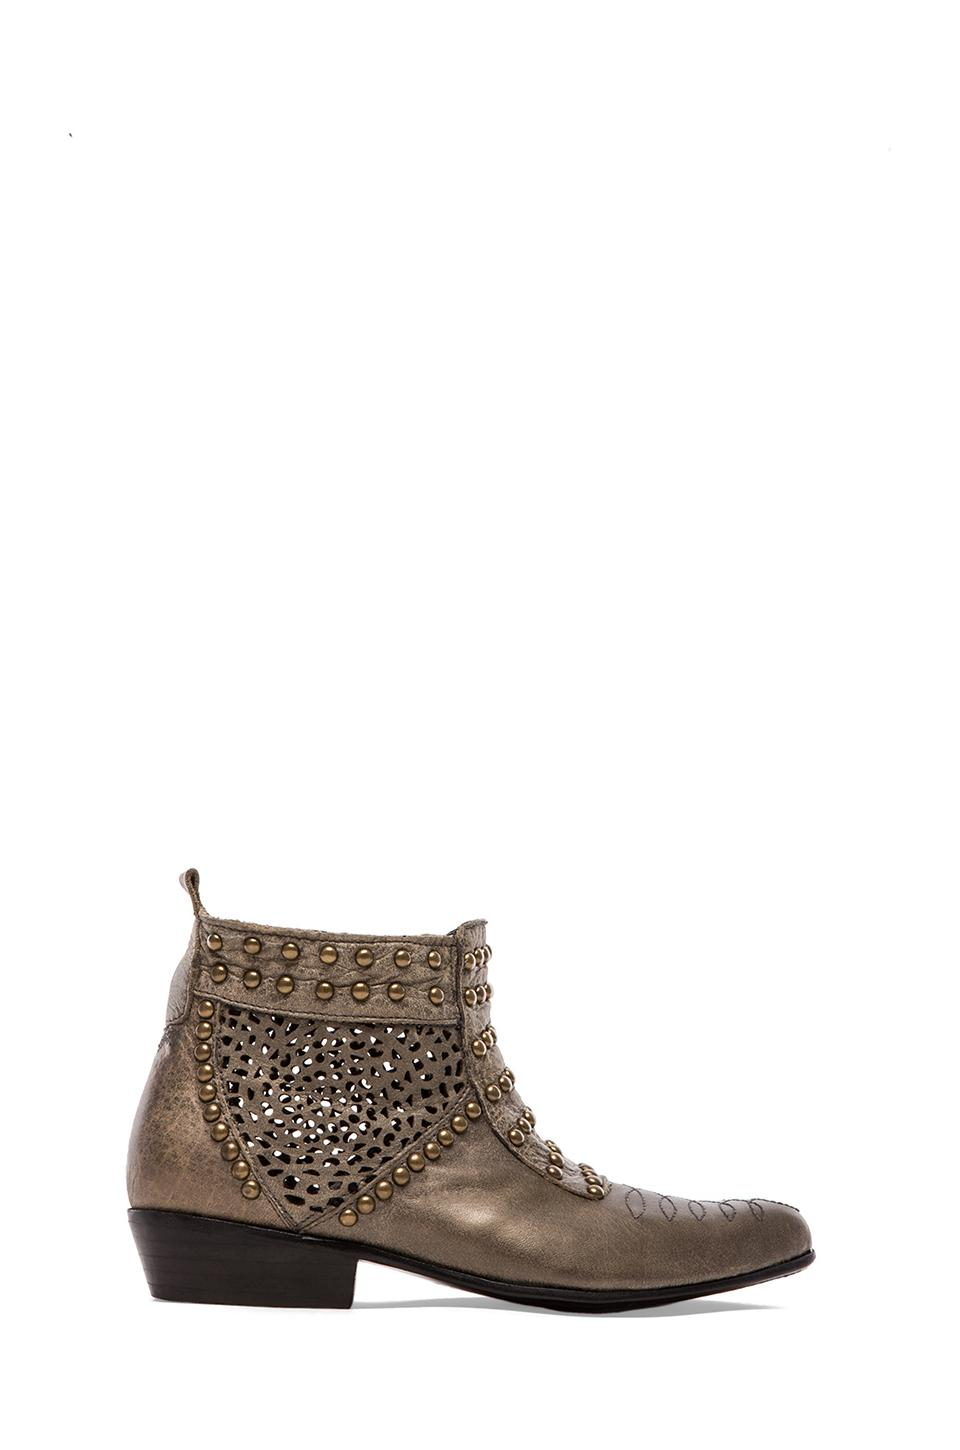 Lyst - Anine bing Studded Boots in Gray